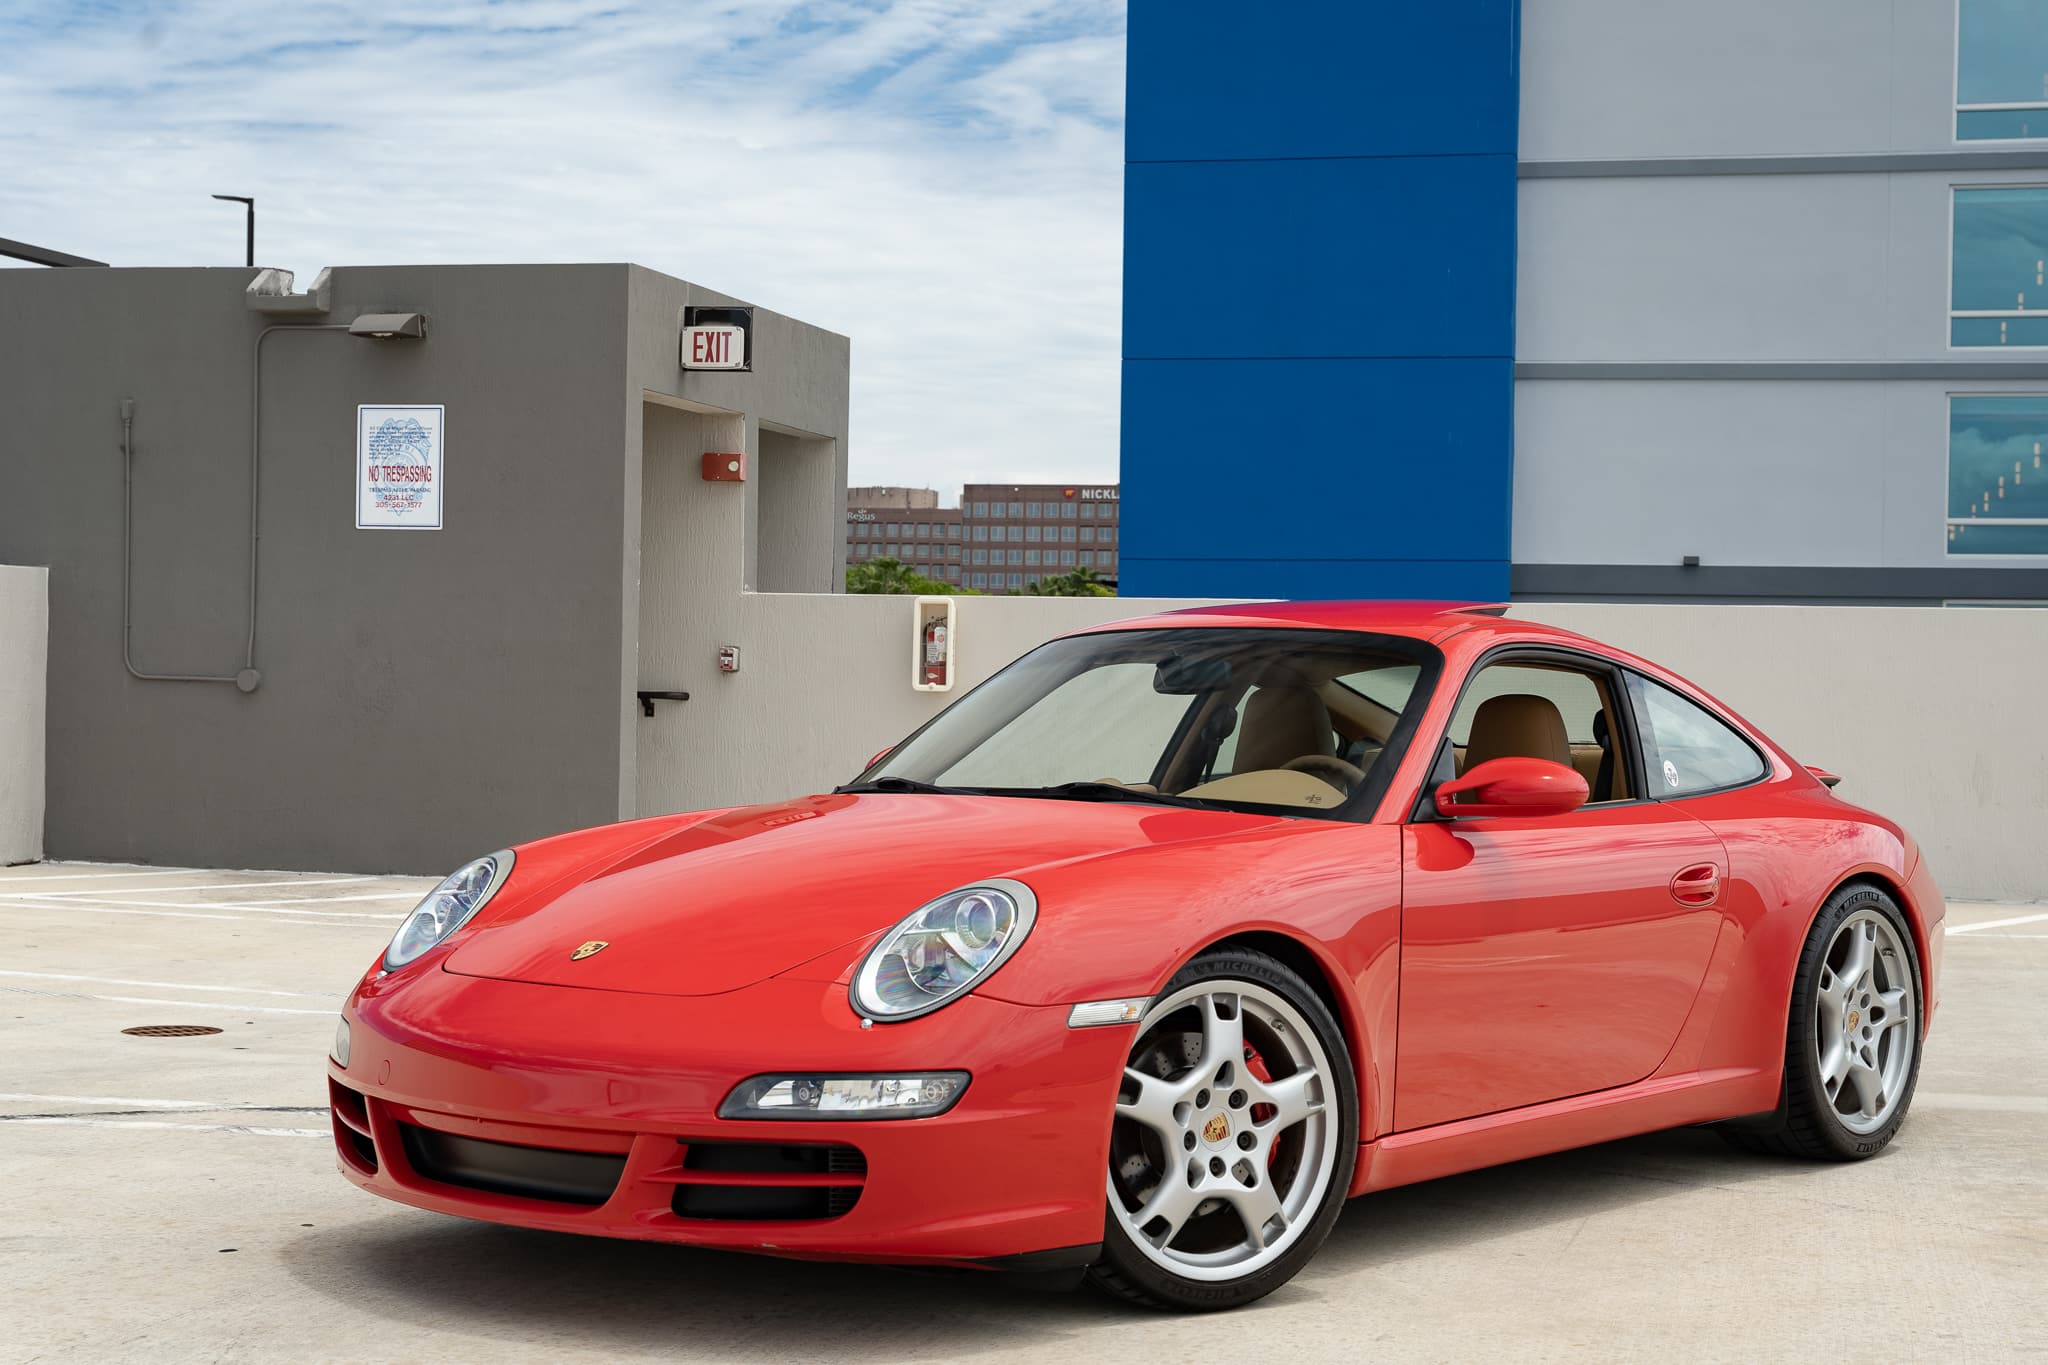 2007 Porsche Carrera S 997.1   6 Speed Manual – New PS4s Tires – Bose Audio – Sport Chrono – Only 53k Miles